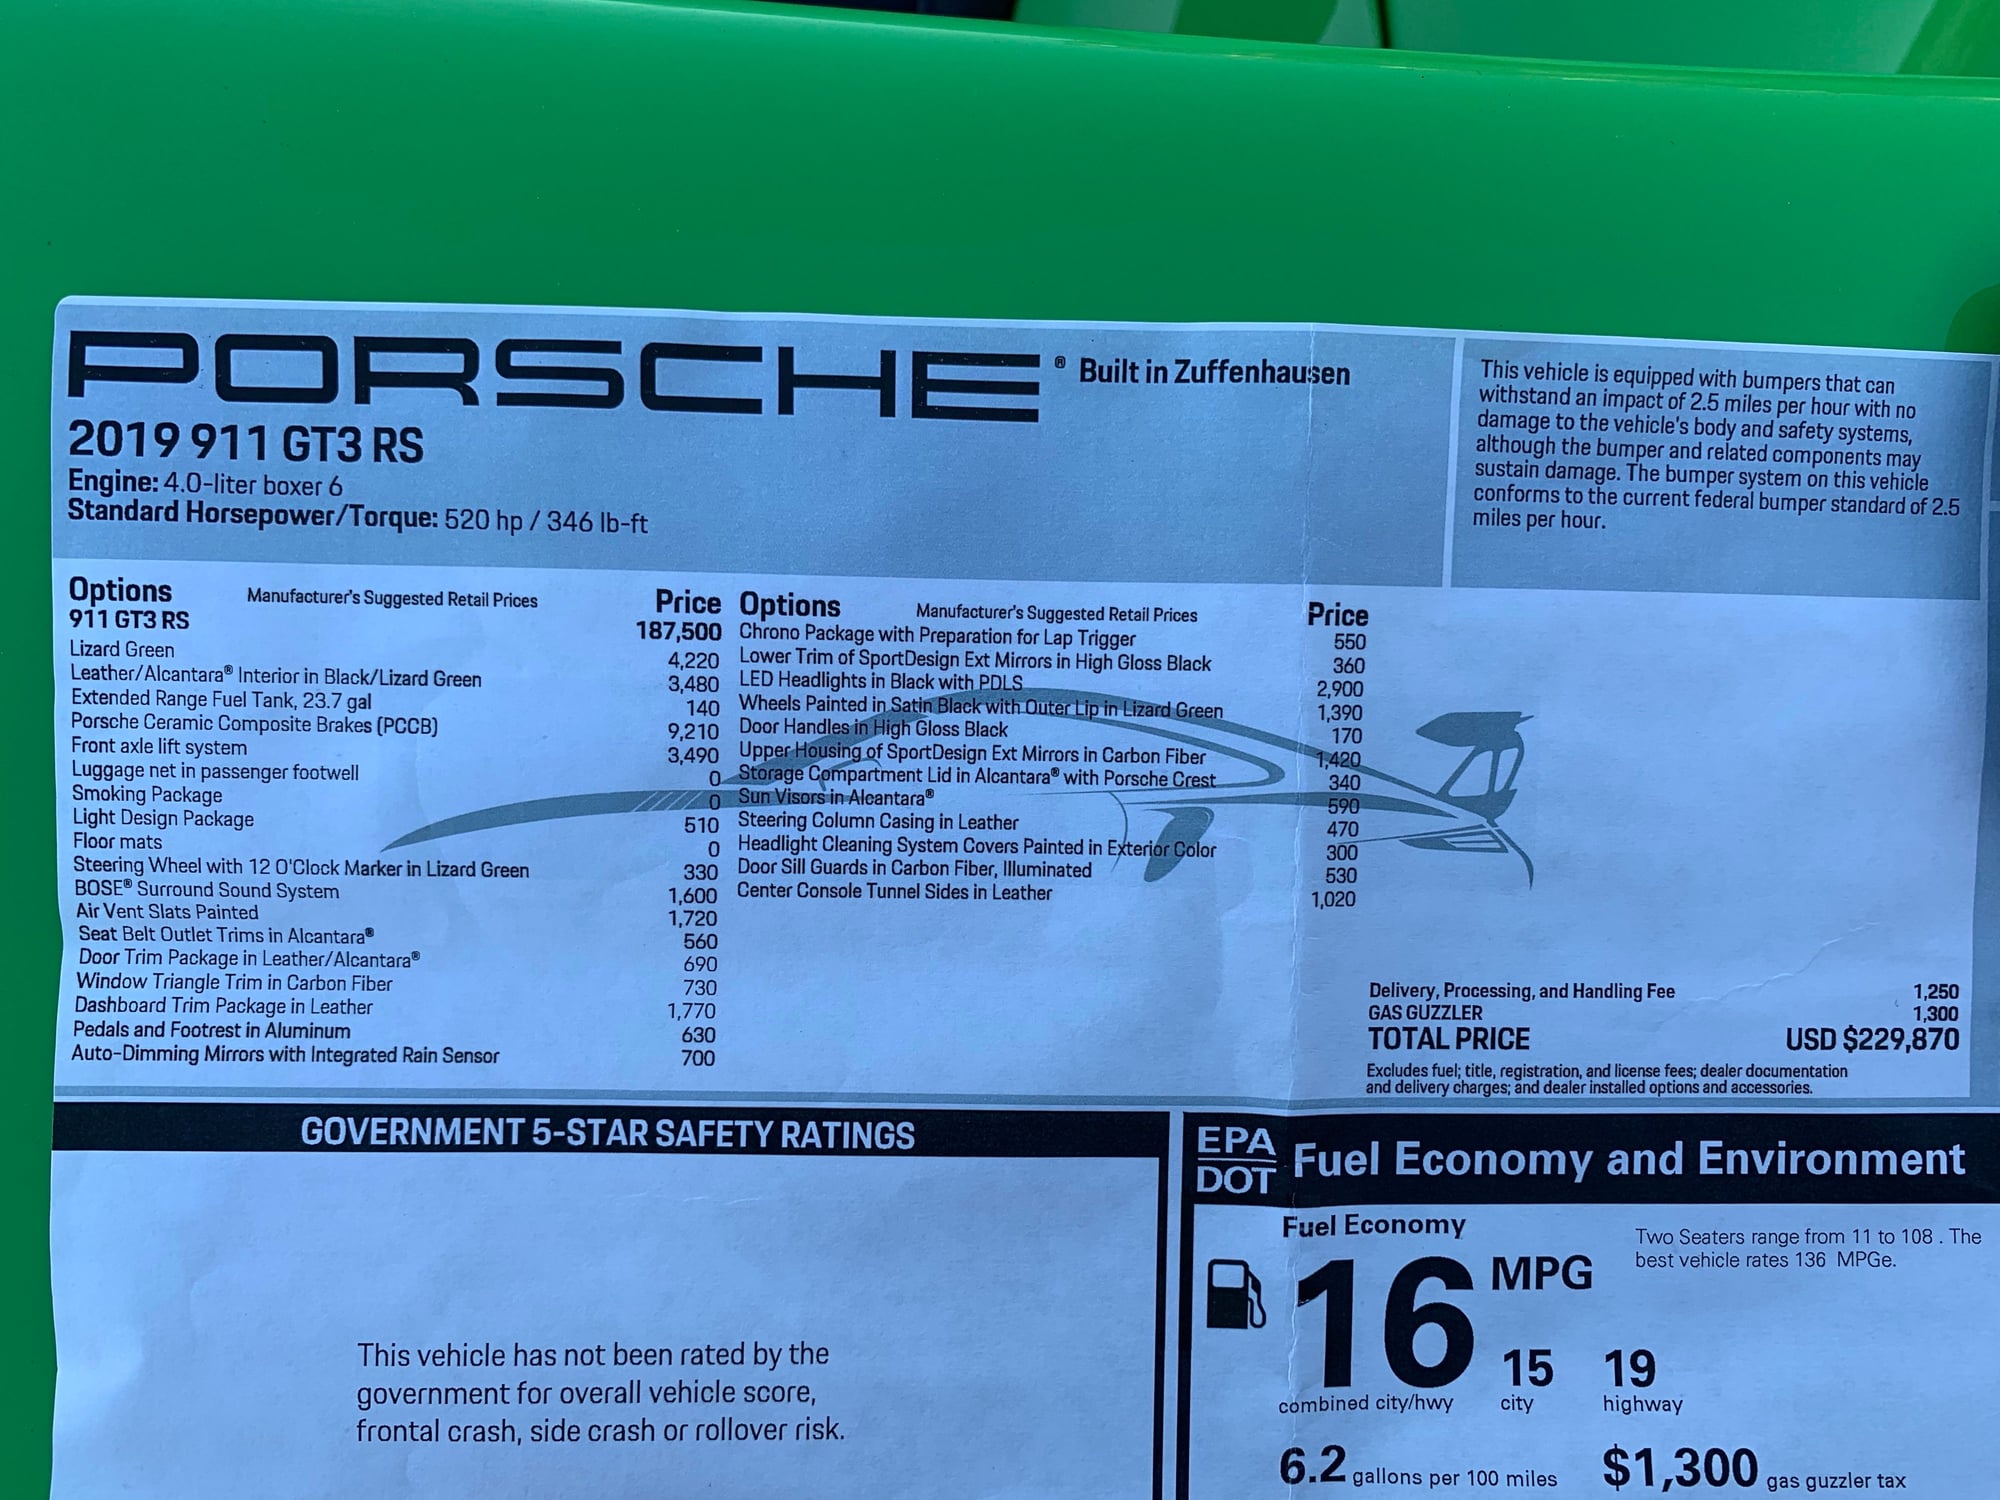 2019 Porsche GT3 - 2019 Lizard Green GT3RS at MSRP 229k - New - VIN wp0af2a93ks1650xx - 14 Miles - 6 cyl - 2WD - Automatic - Coupe - Other - Sf Bay Area, CA 94111, United States